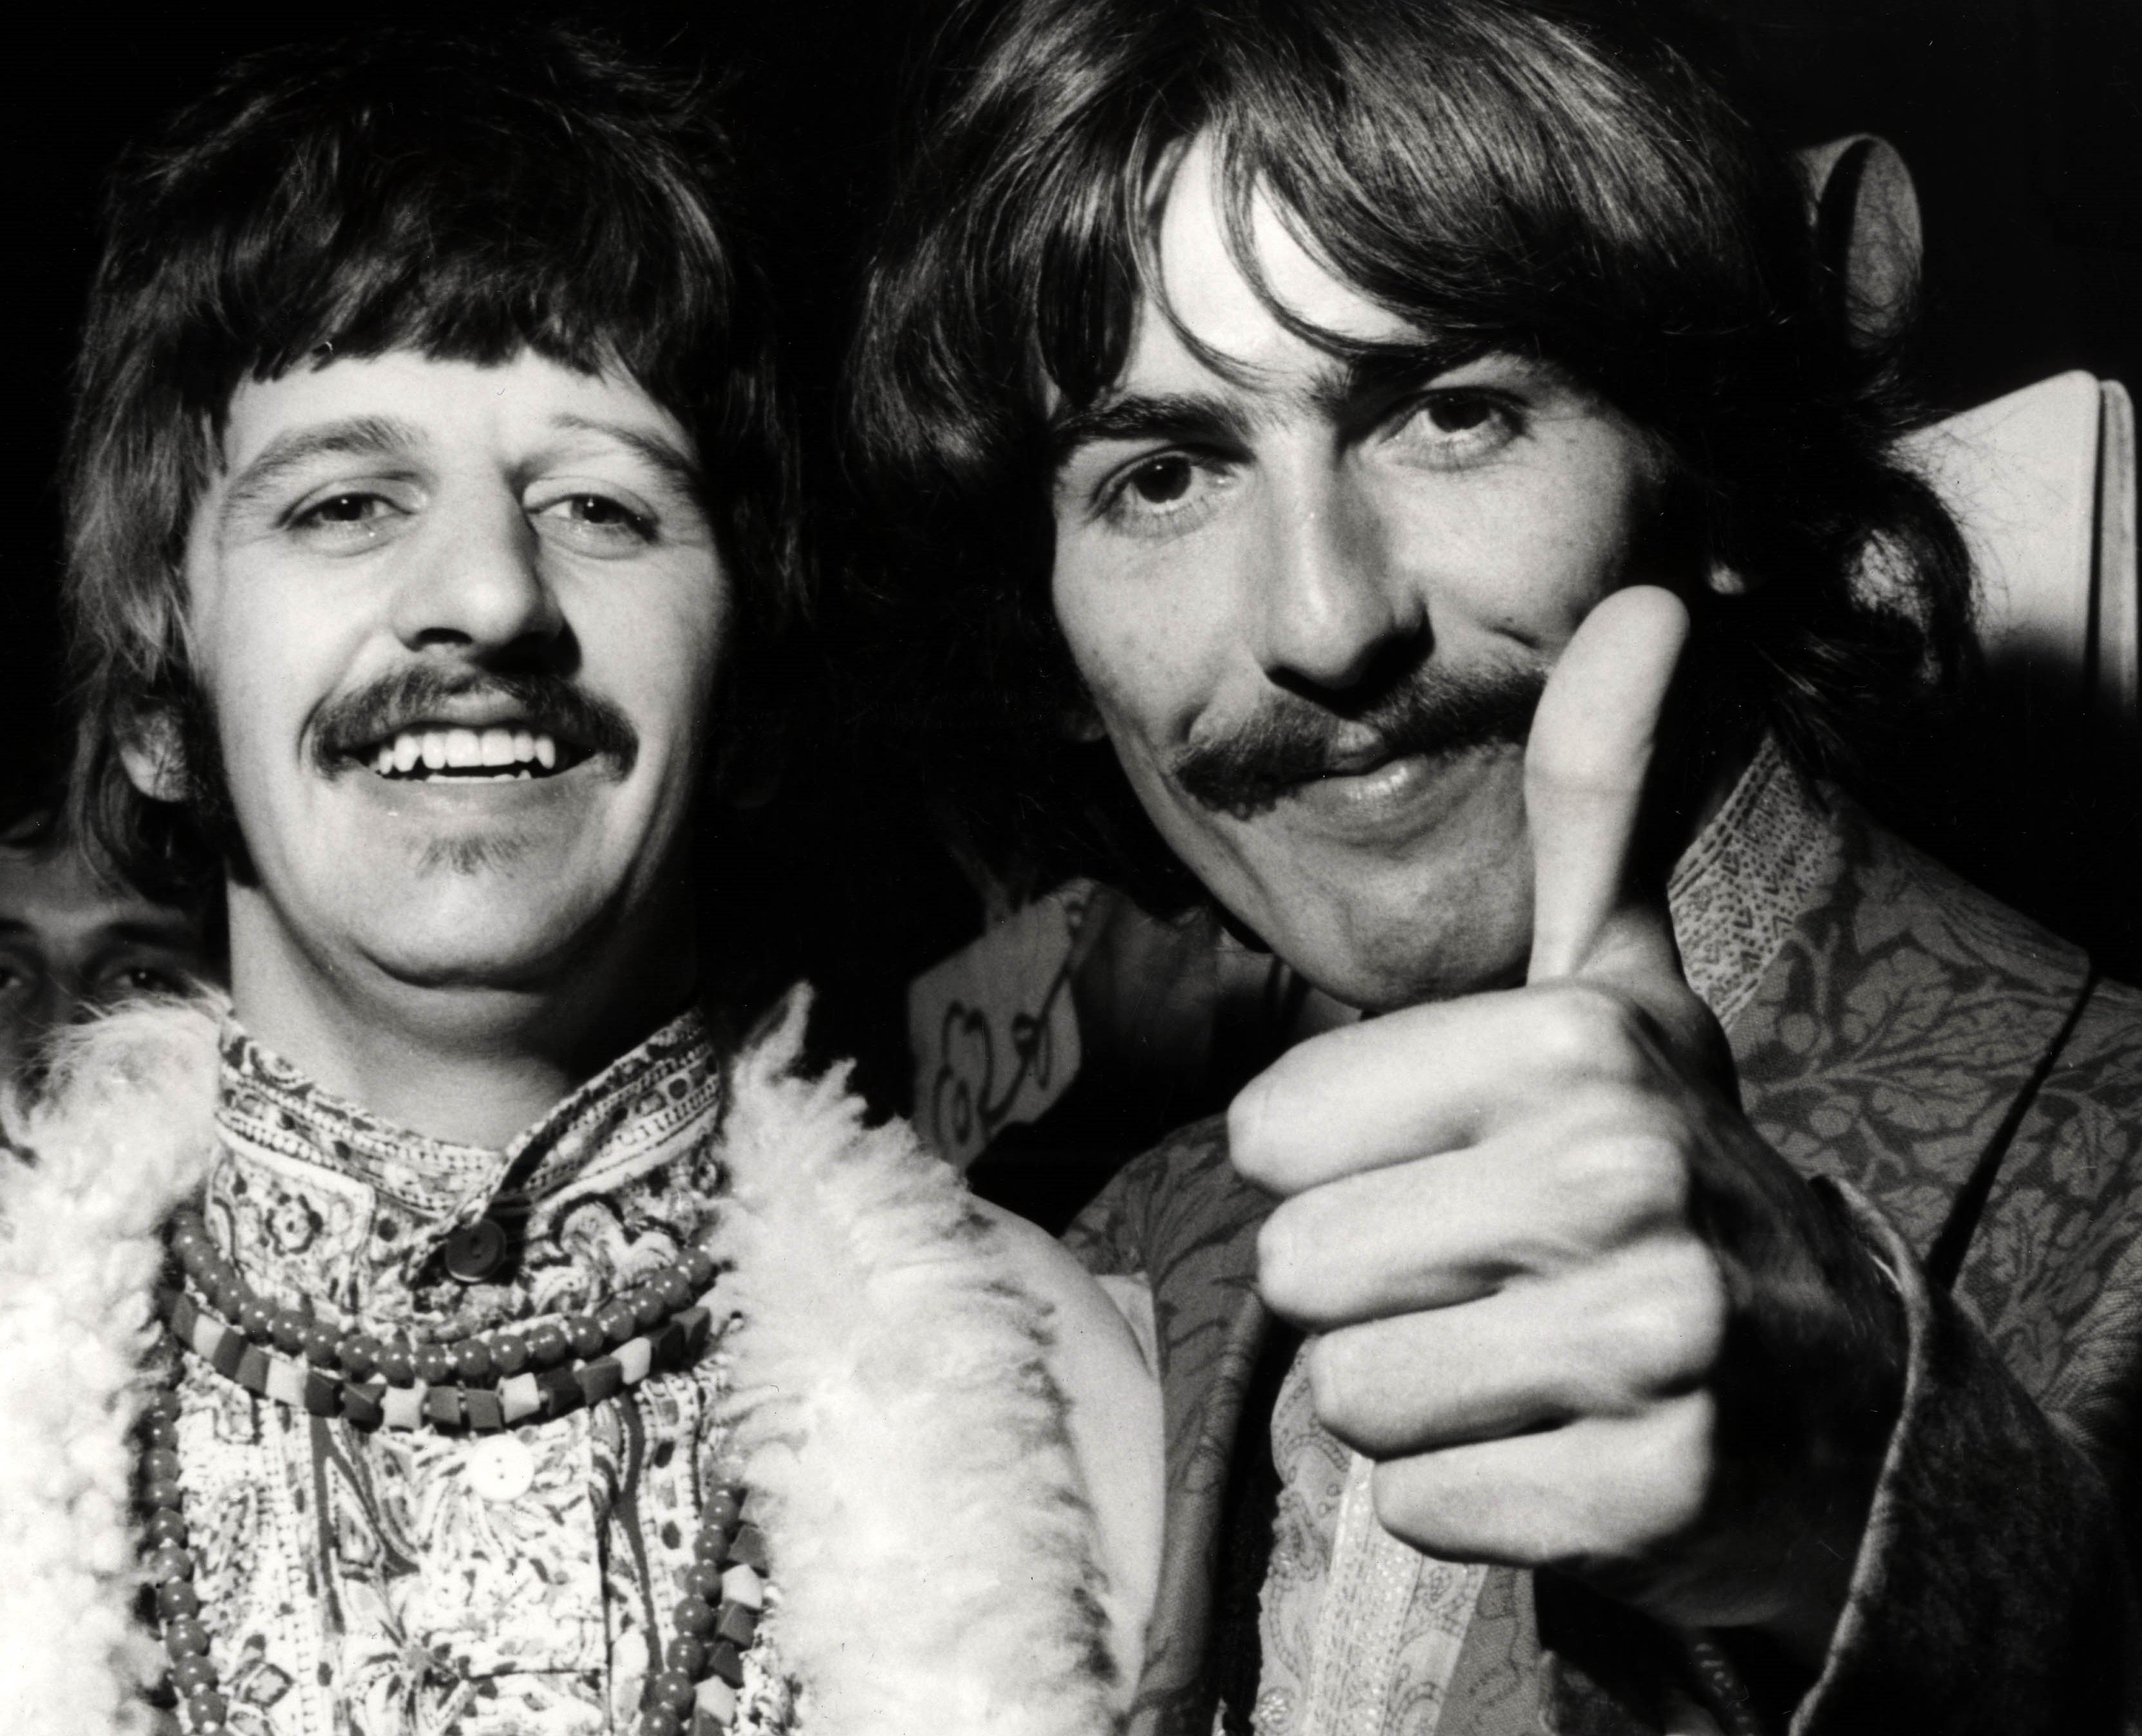 Ringo Starr with George Harrison in black-and-white